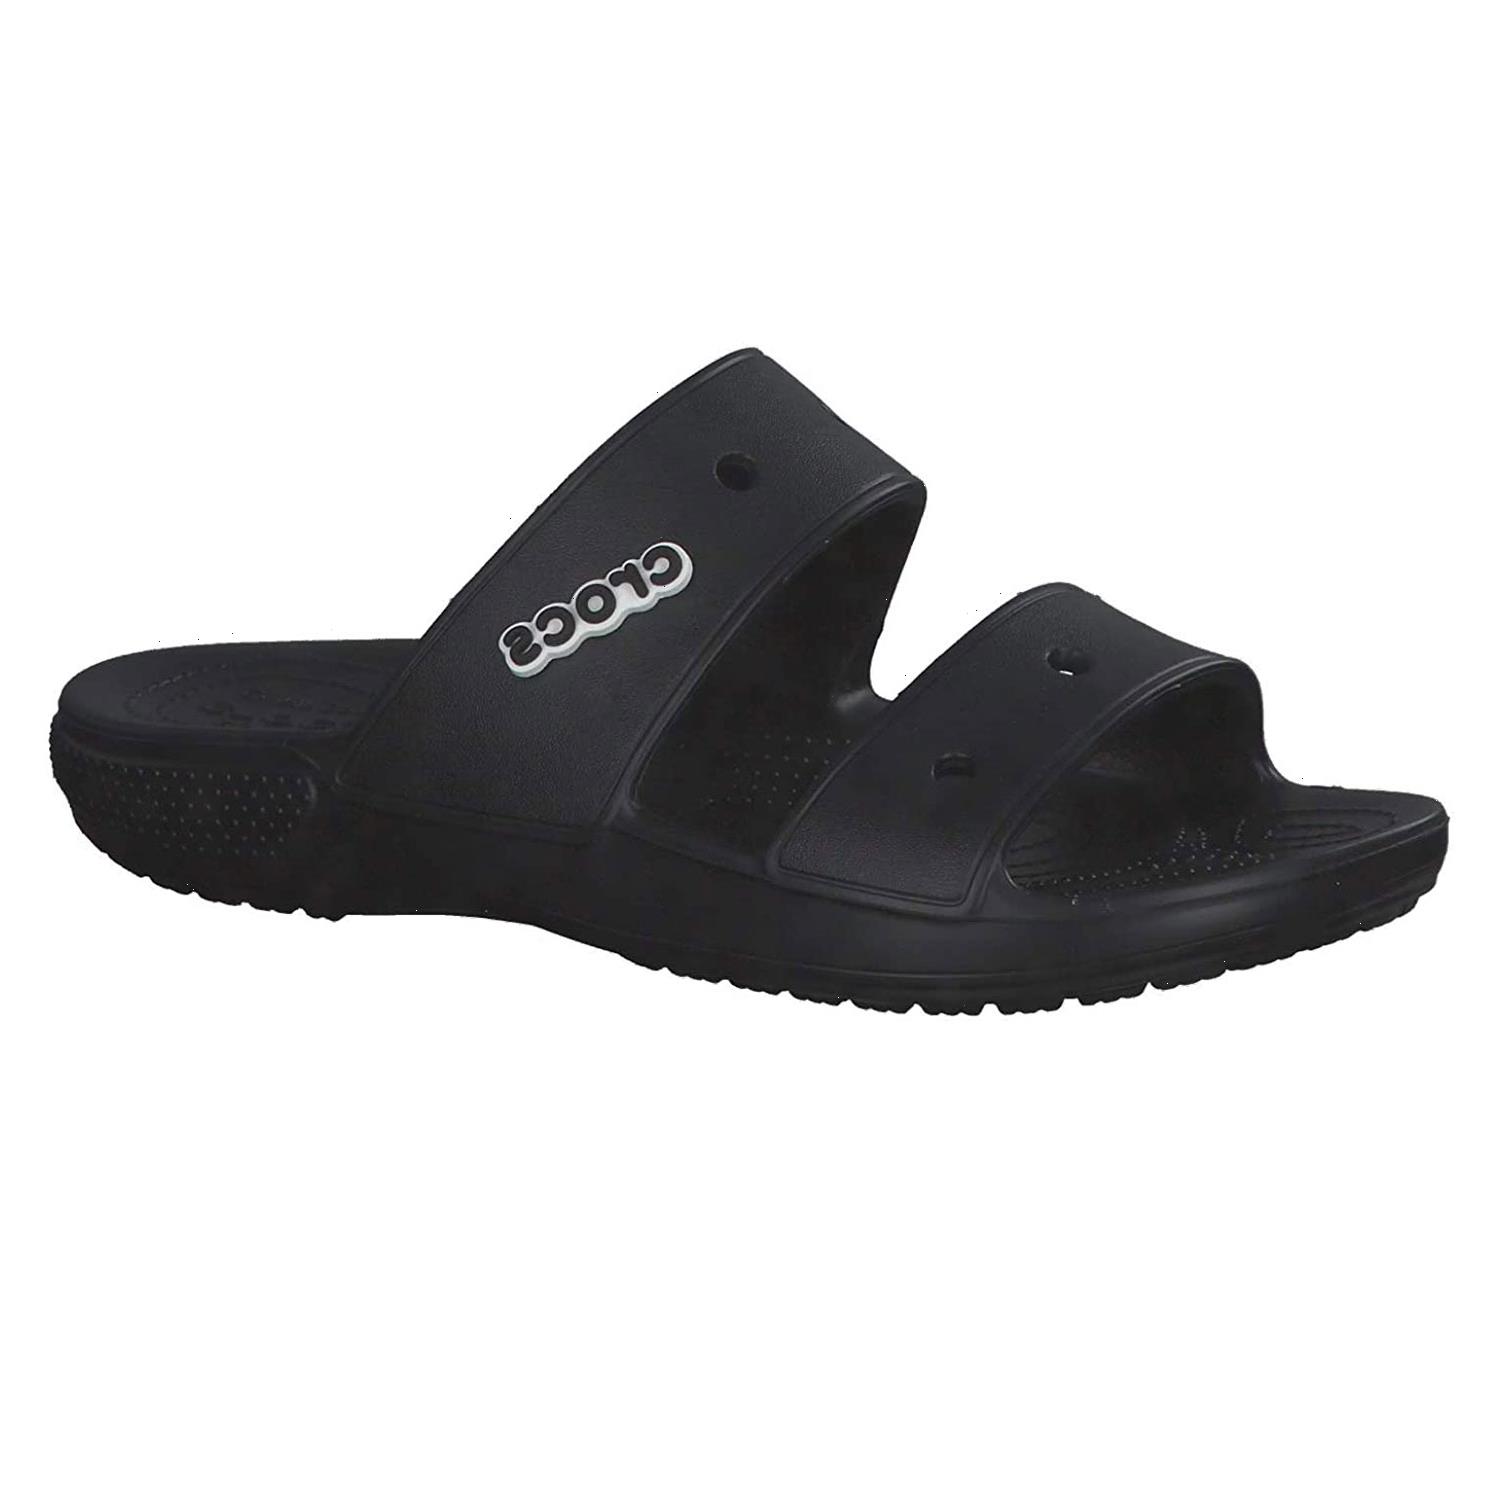 These Comfy New Crocs Slides Got Over 80,000 Likes on TikTok - and They ...